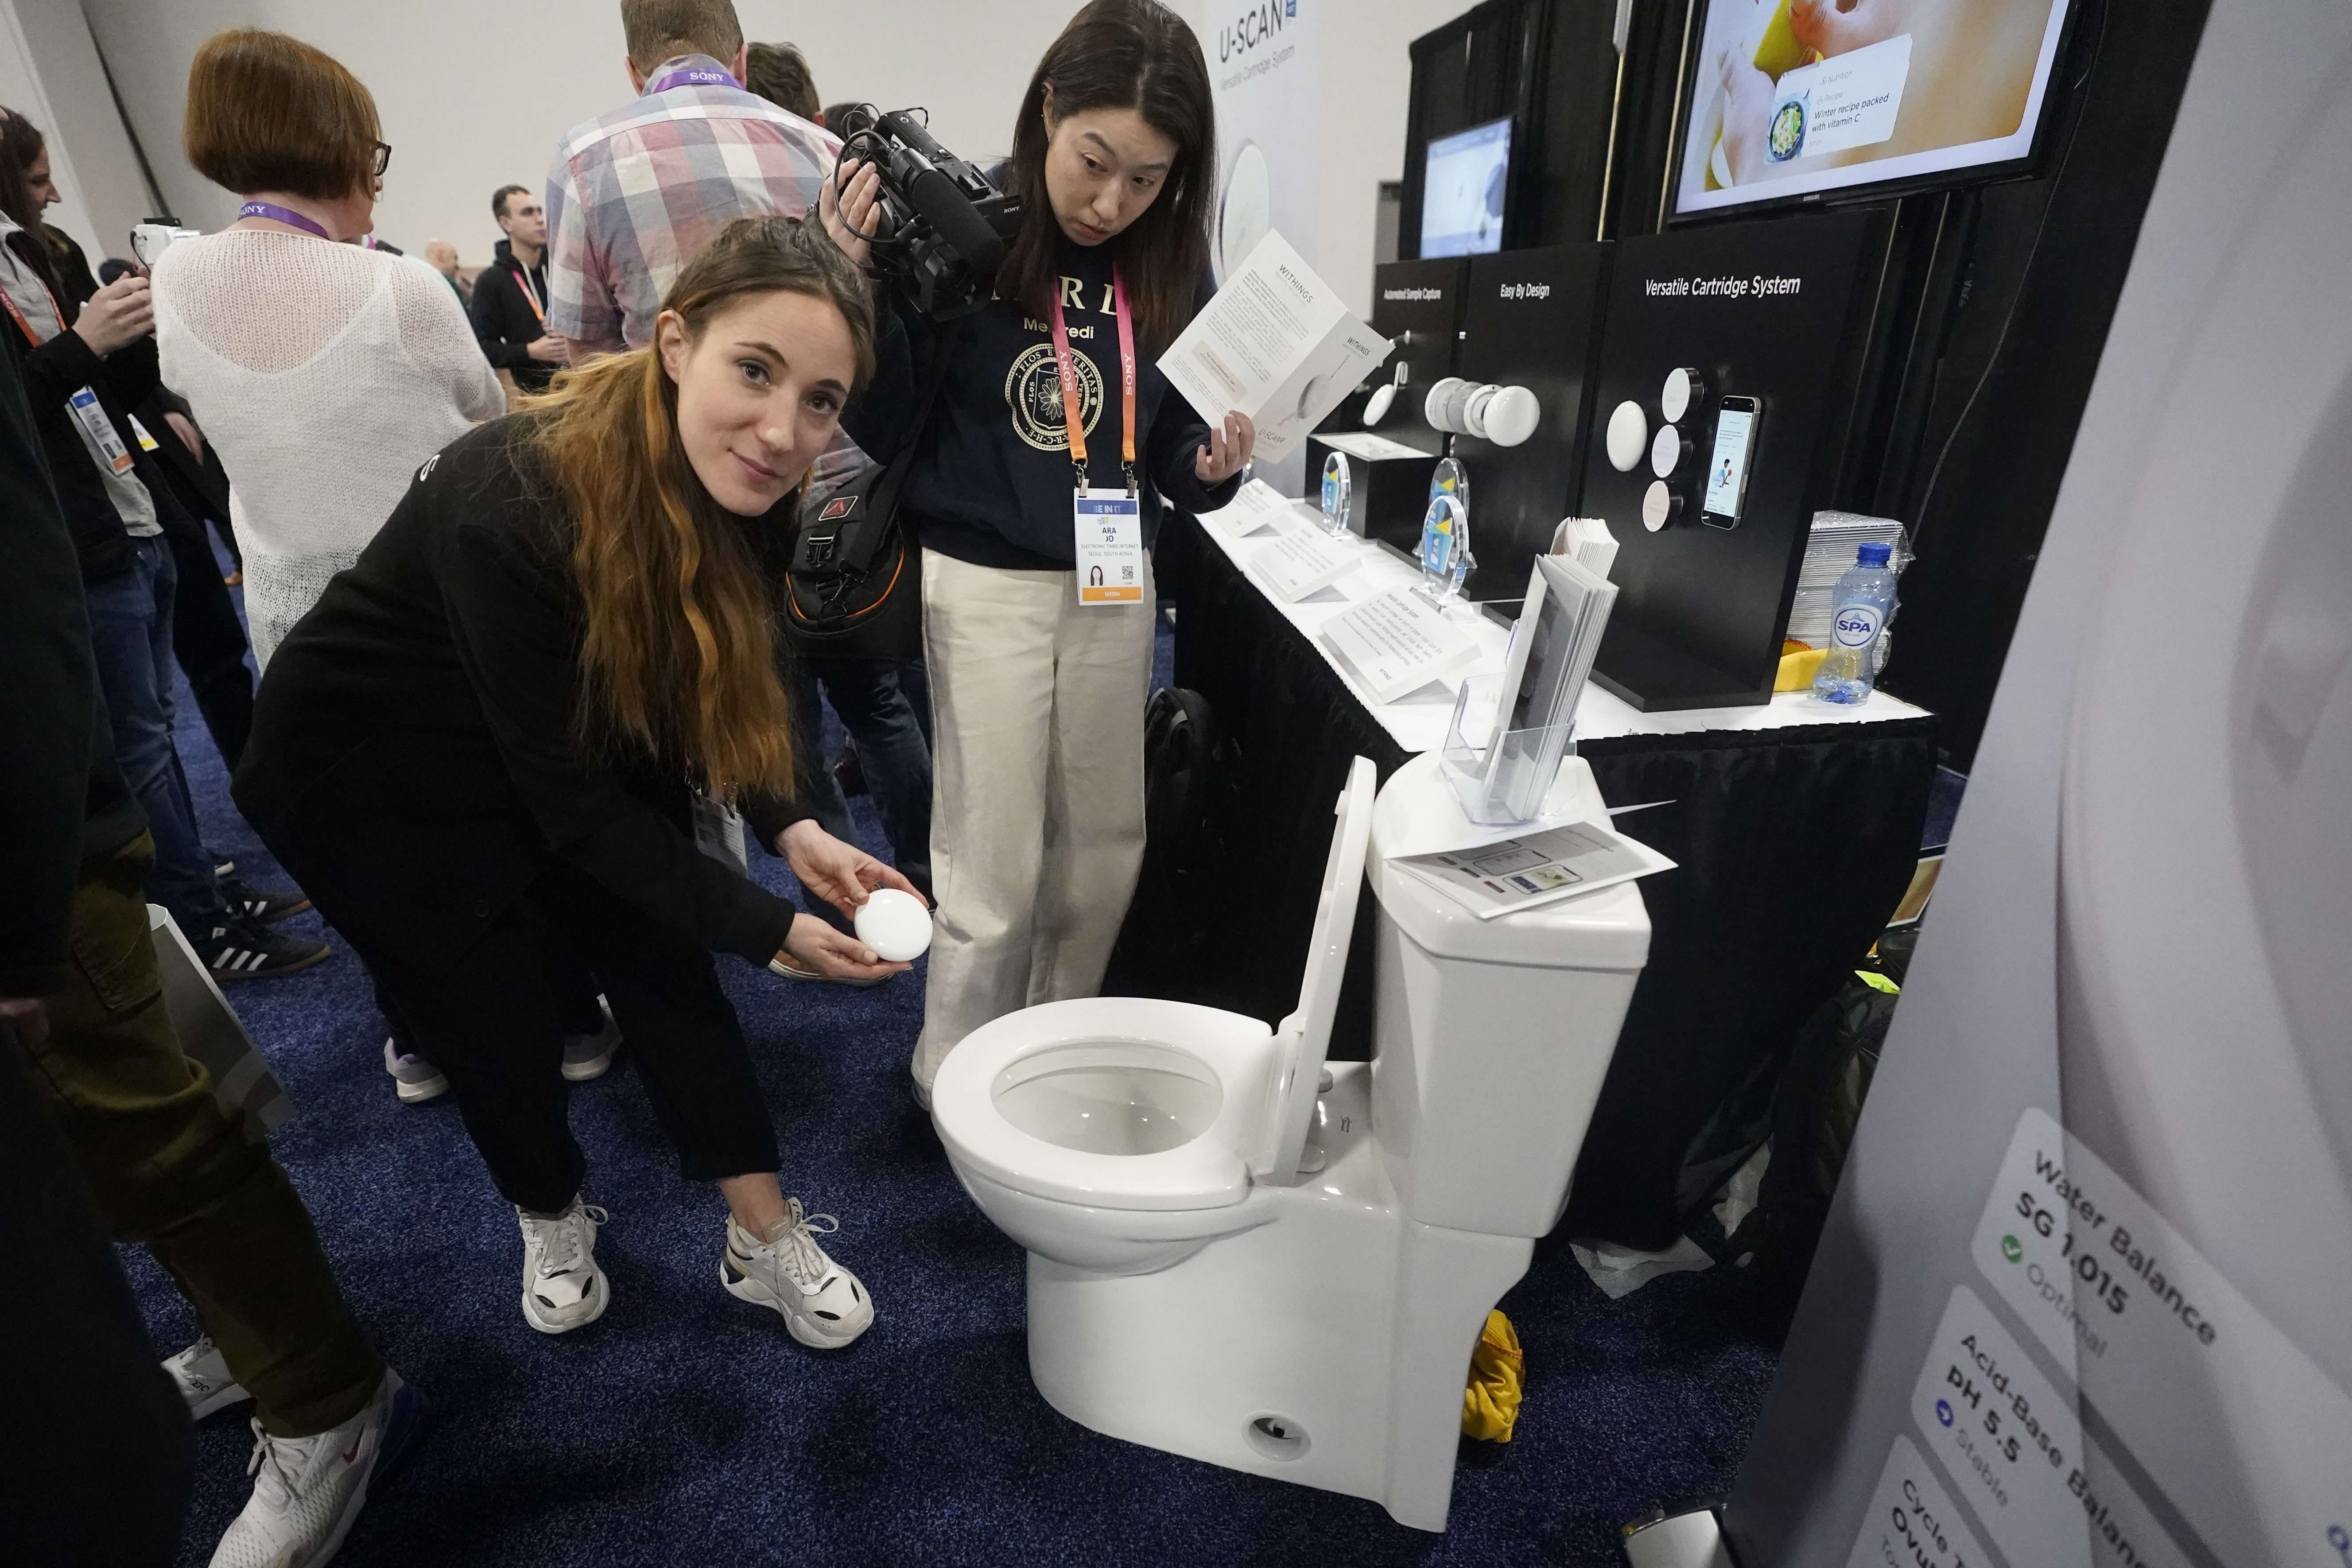 The Best Home Gadgets of CES 2023